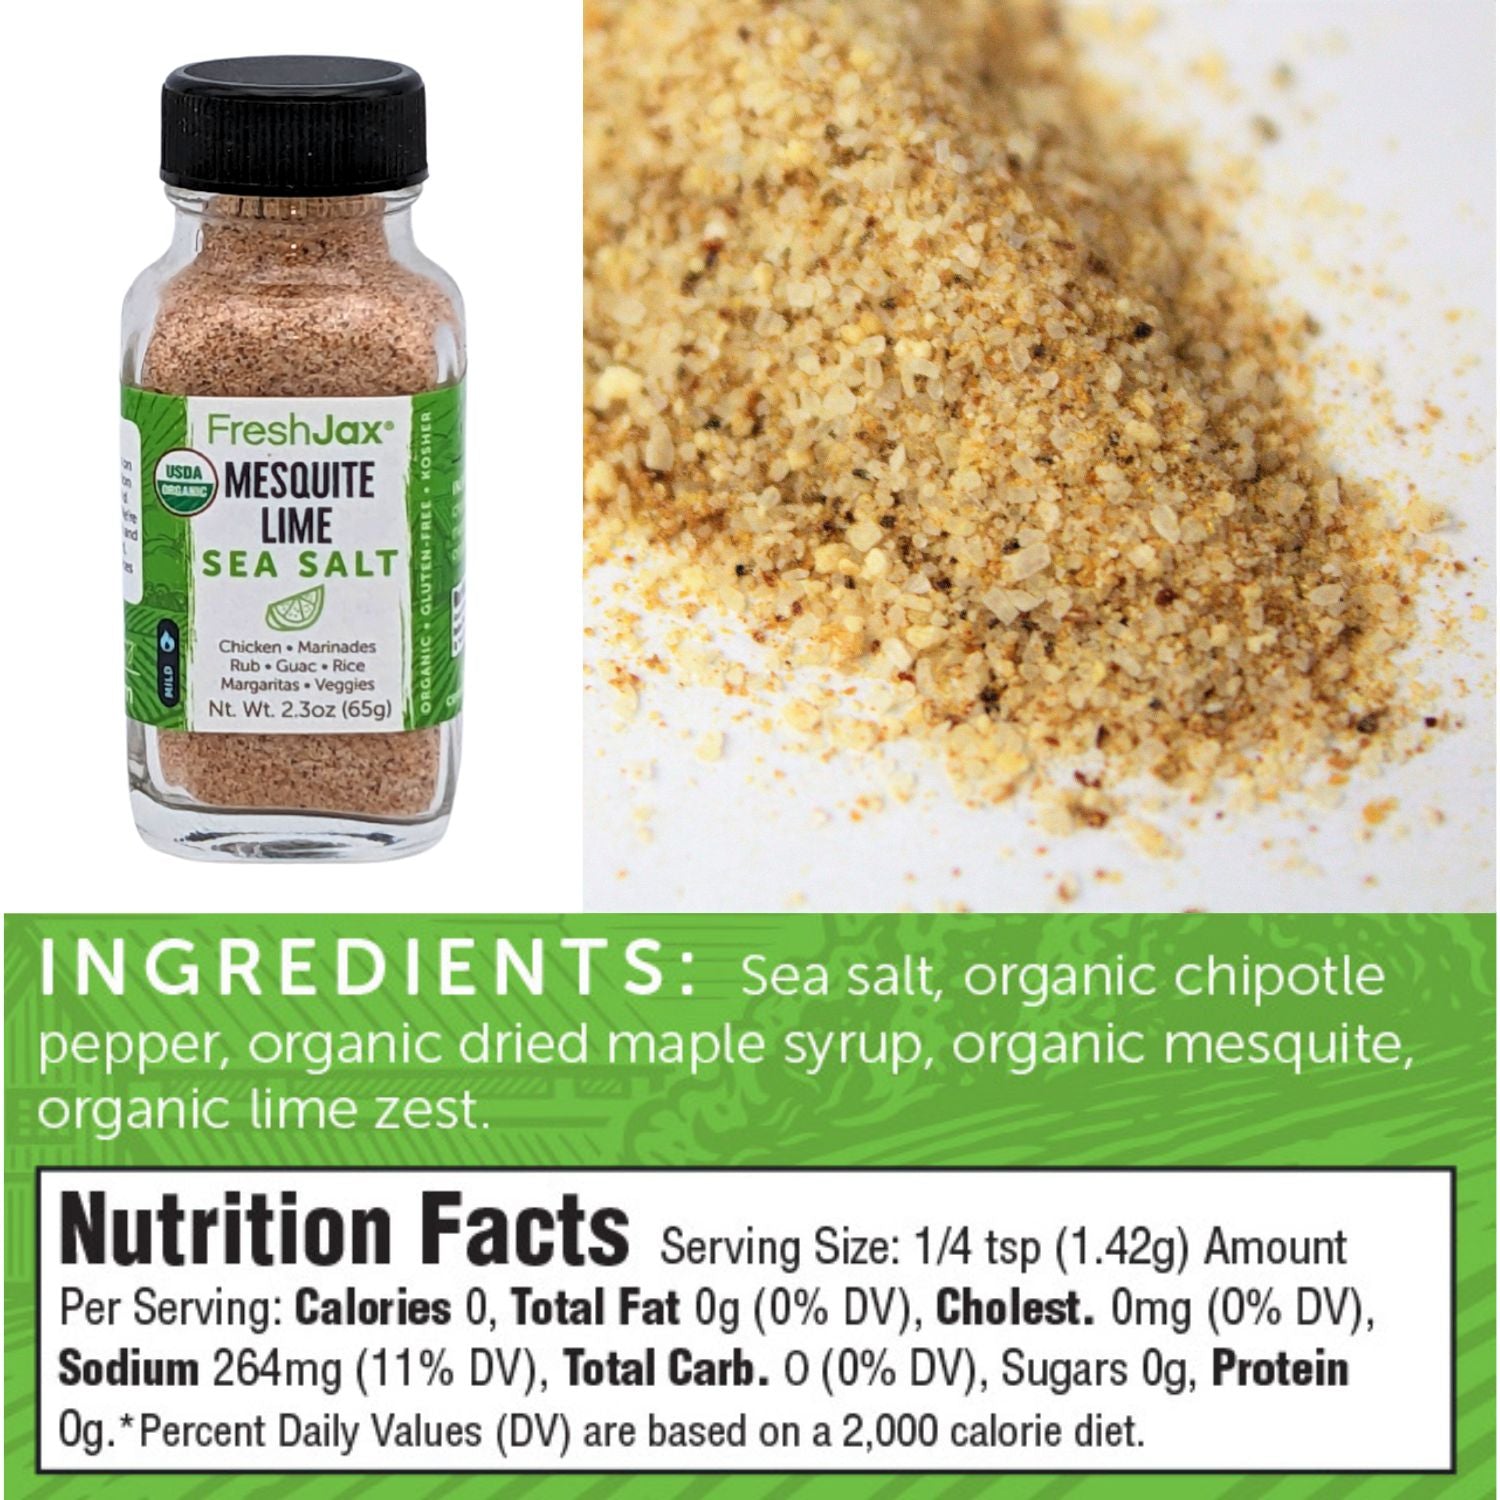 FreshJax Organic Spices Mesquite Lime Sea Salt Nutritional Information and Ingredients